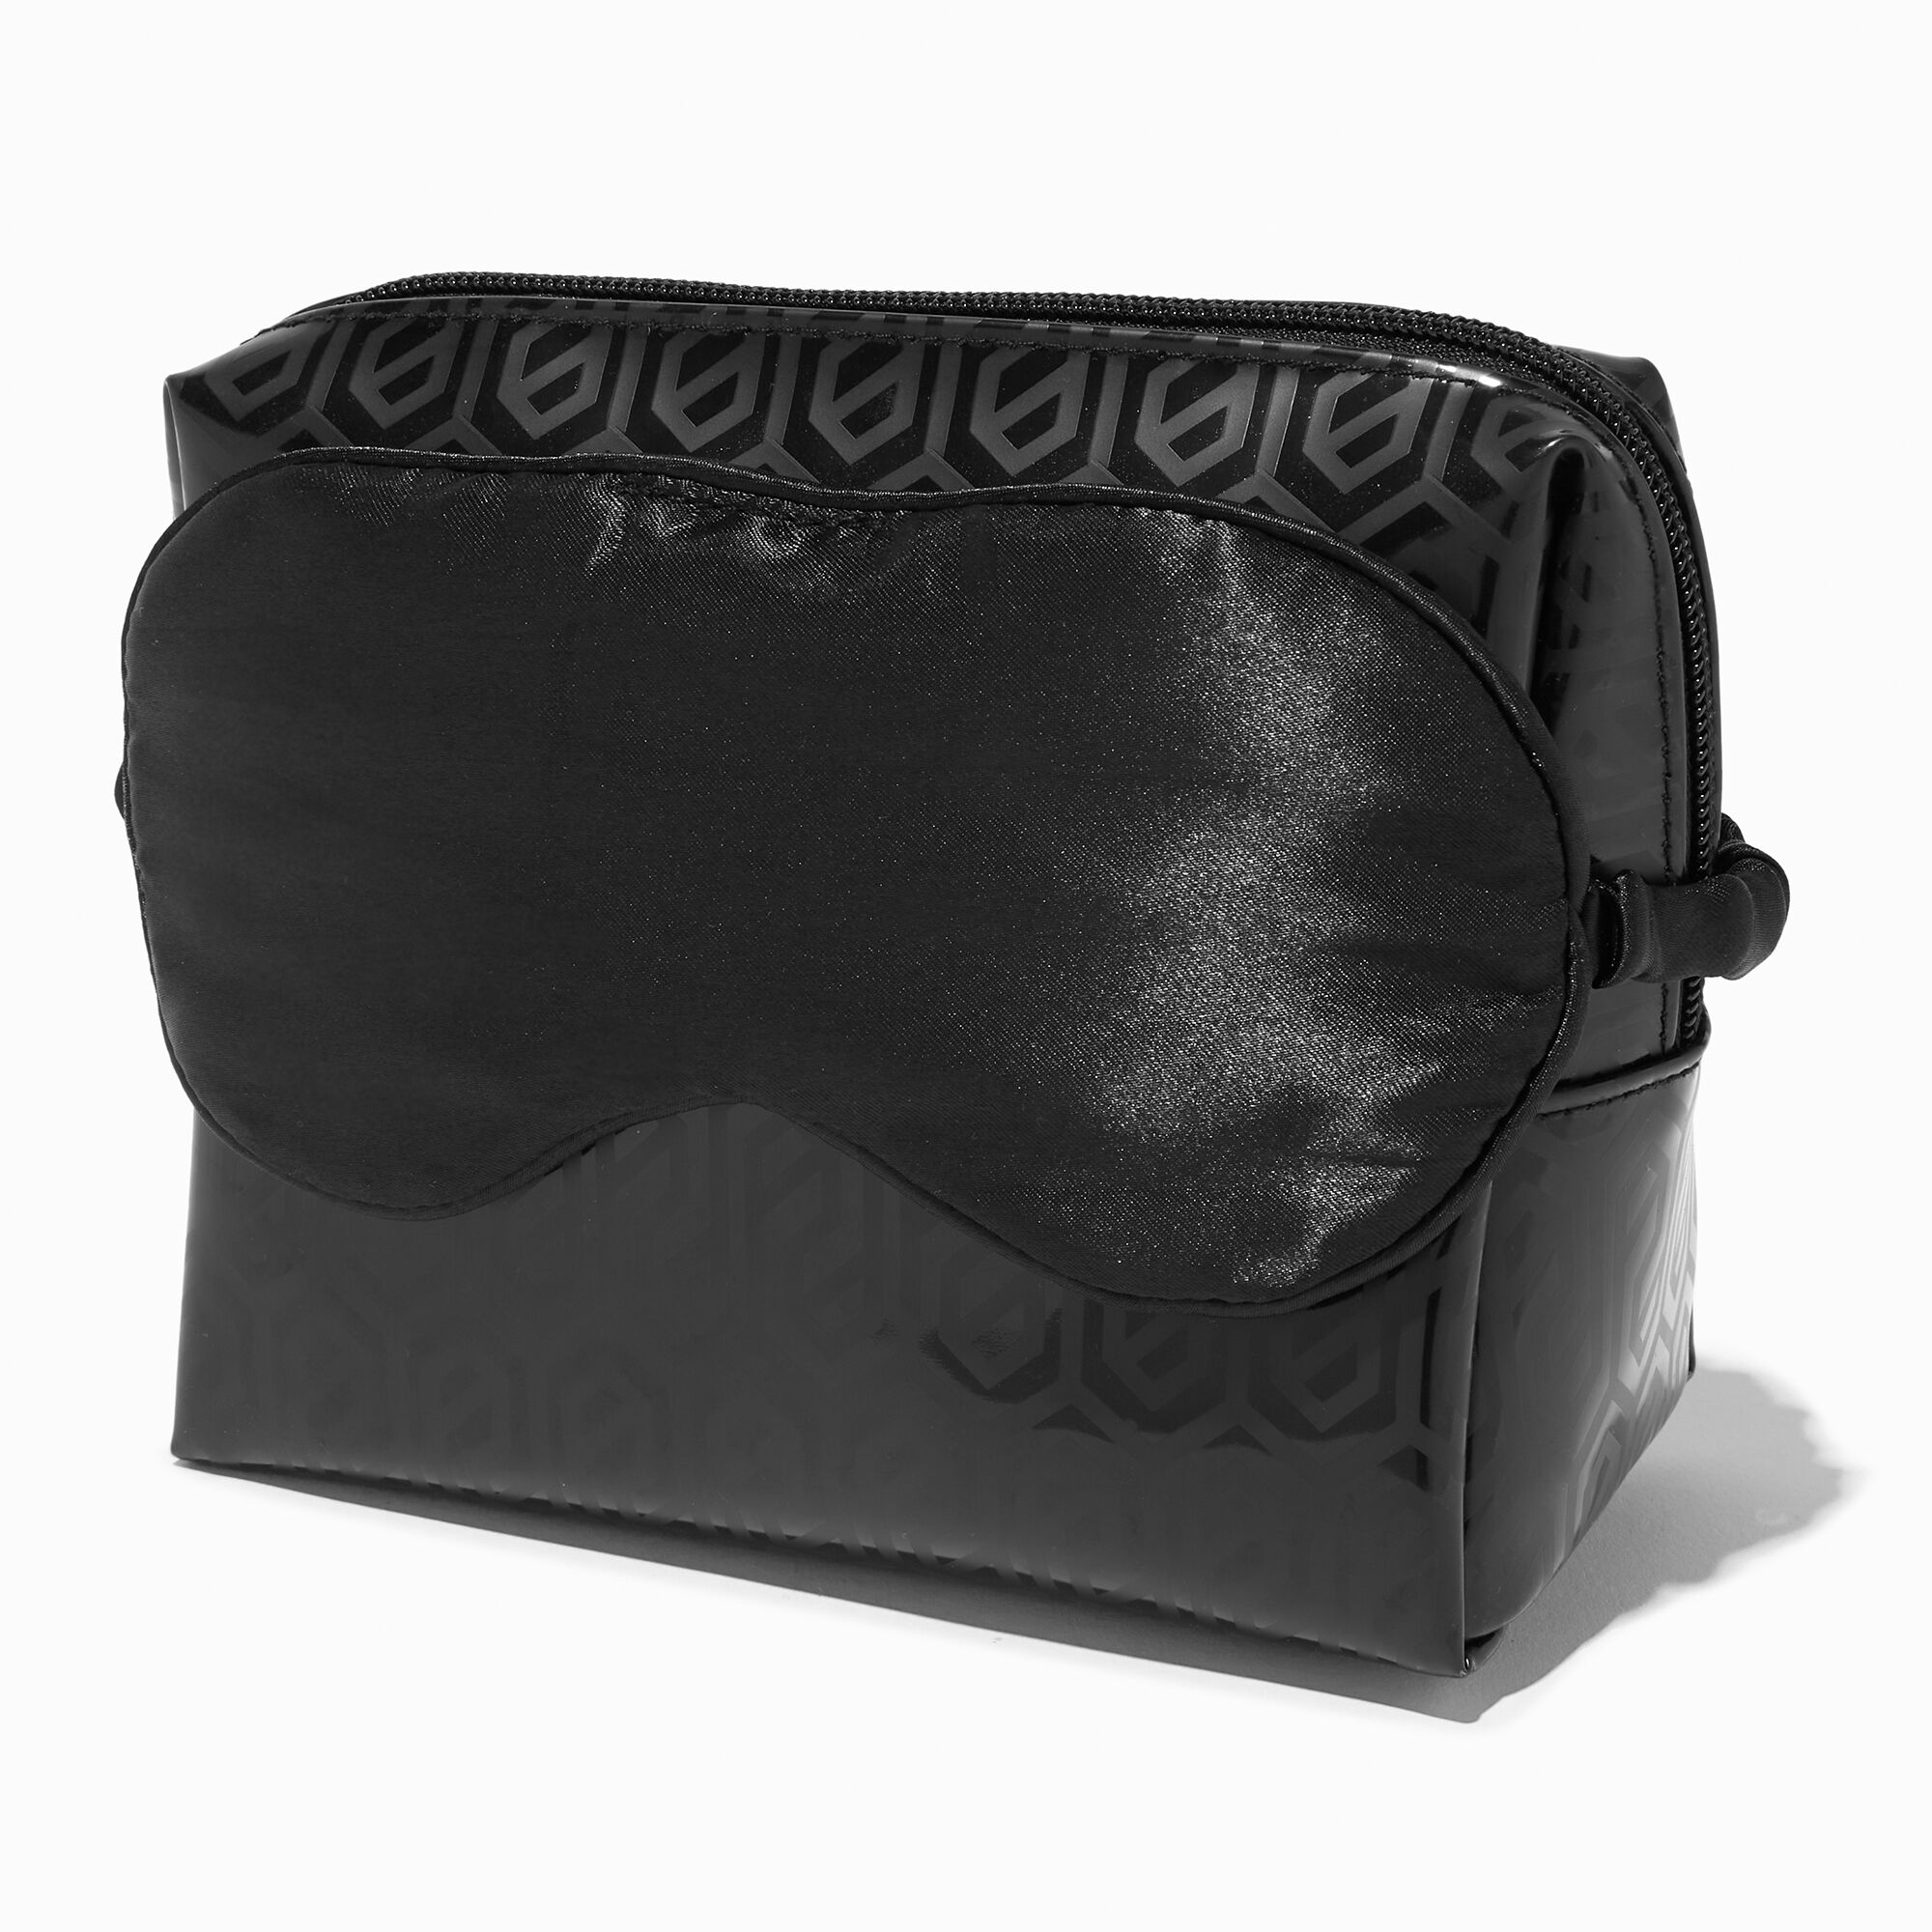 View Claires Medium Makeup Bag With Sleeping Mask Black information